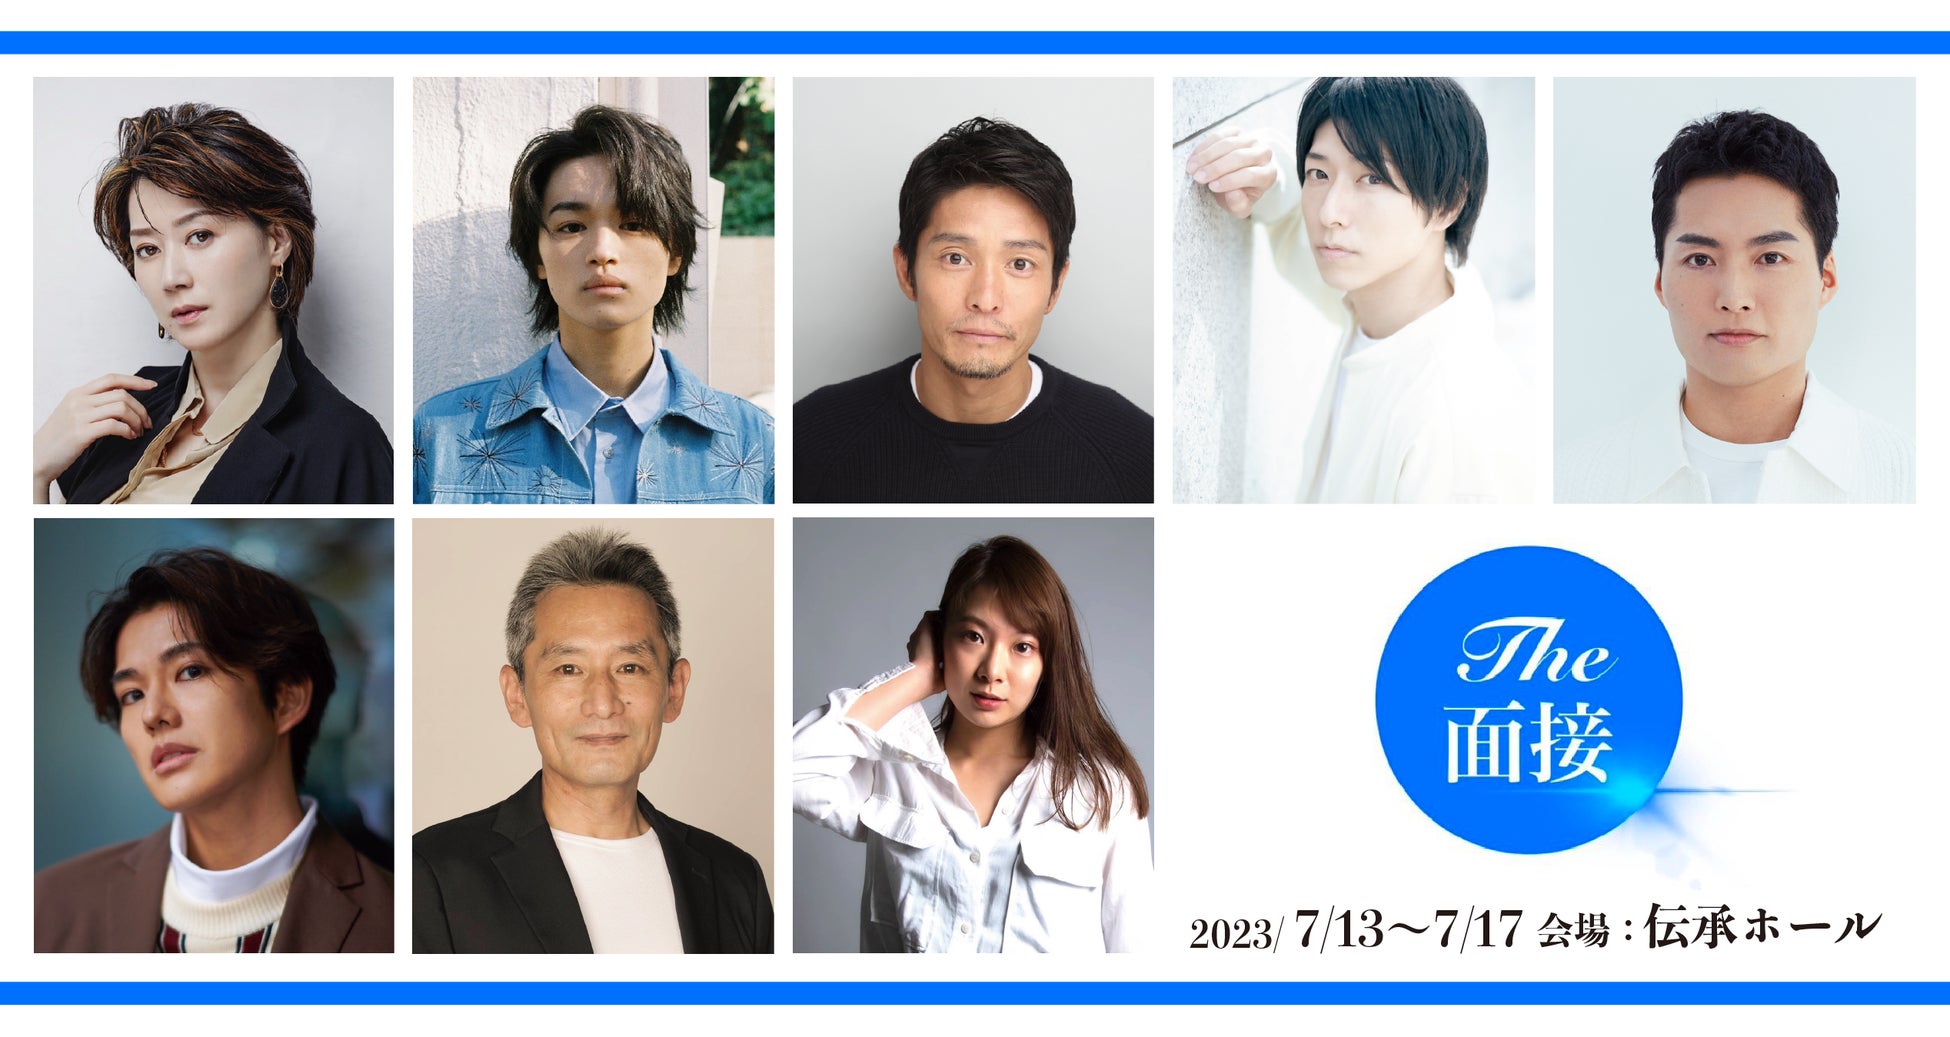 「STAND FOR ARTISTS」主催　舞台「The 面接」上演決定！